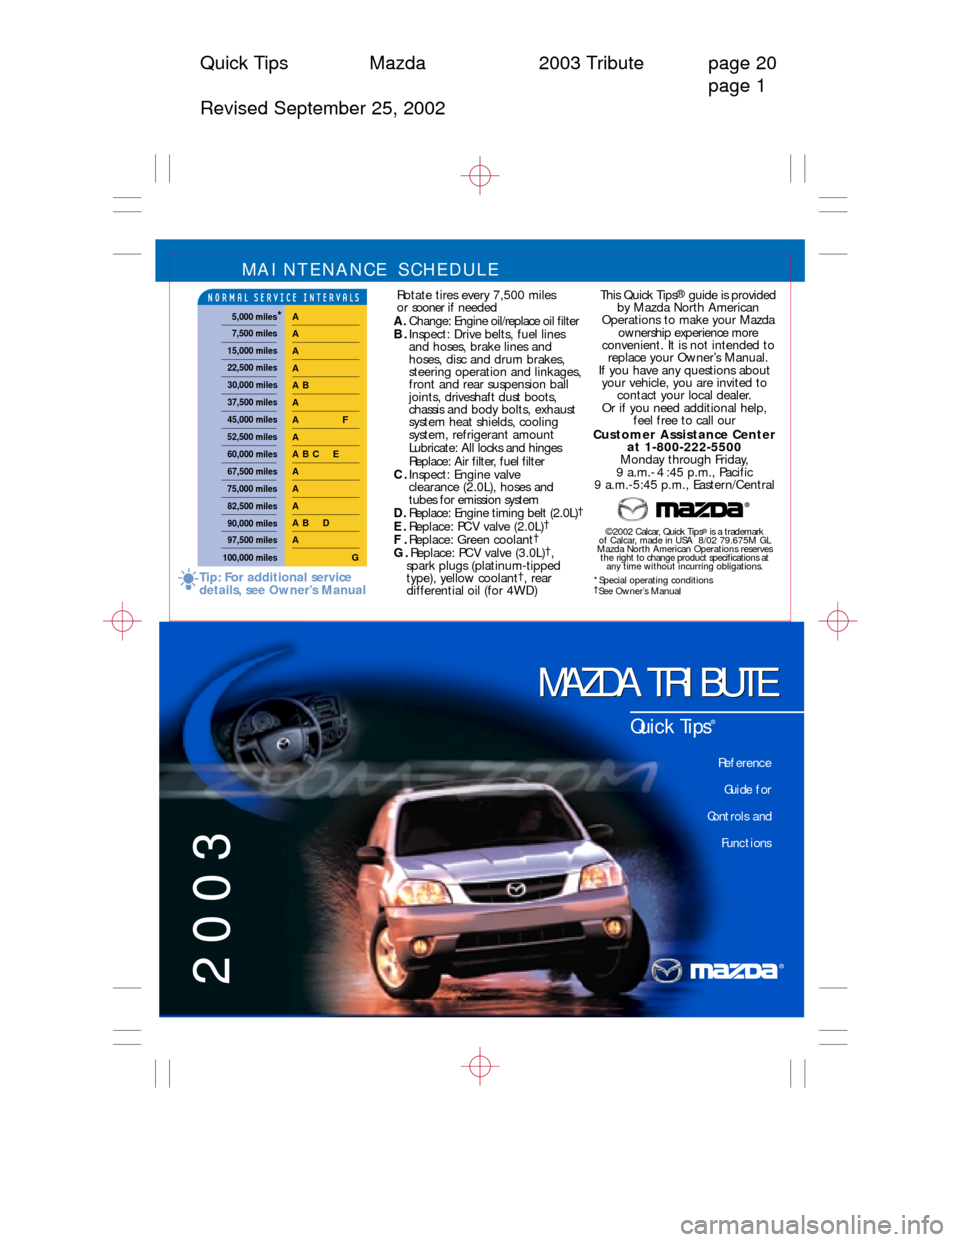 MAZDA MODEL TRIBUTE 2003  Quick Tips (in English) Quick Tips Mazda 2003 Tribute page 20
page 1
Revised September 25, 2002
MAINTENANCE SCHEDULE 
Rotate tires every 7,500 miles 
o r  sooner if needed
A.Change: Engine oil/replace oil filter
B.Inspect: D